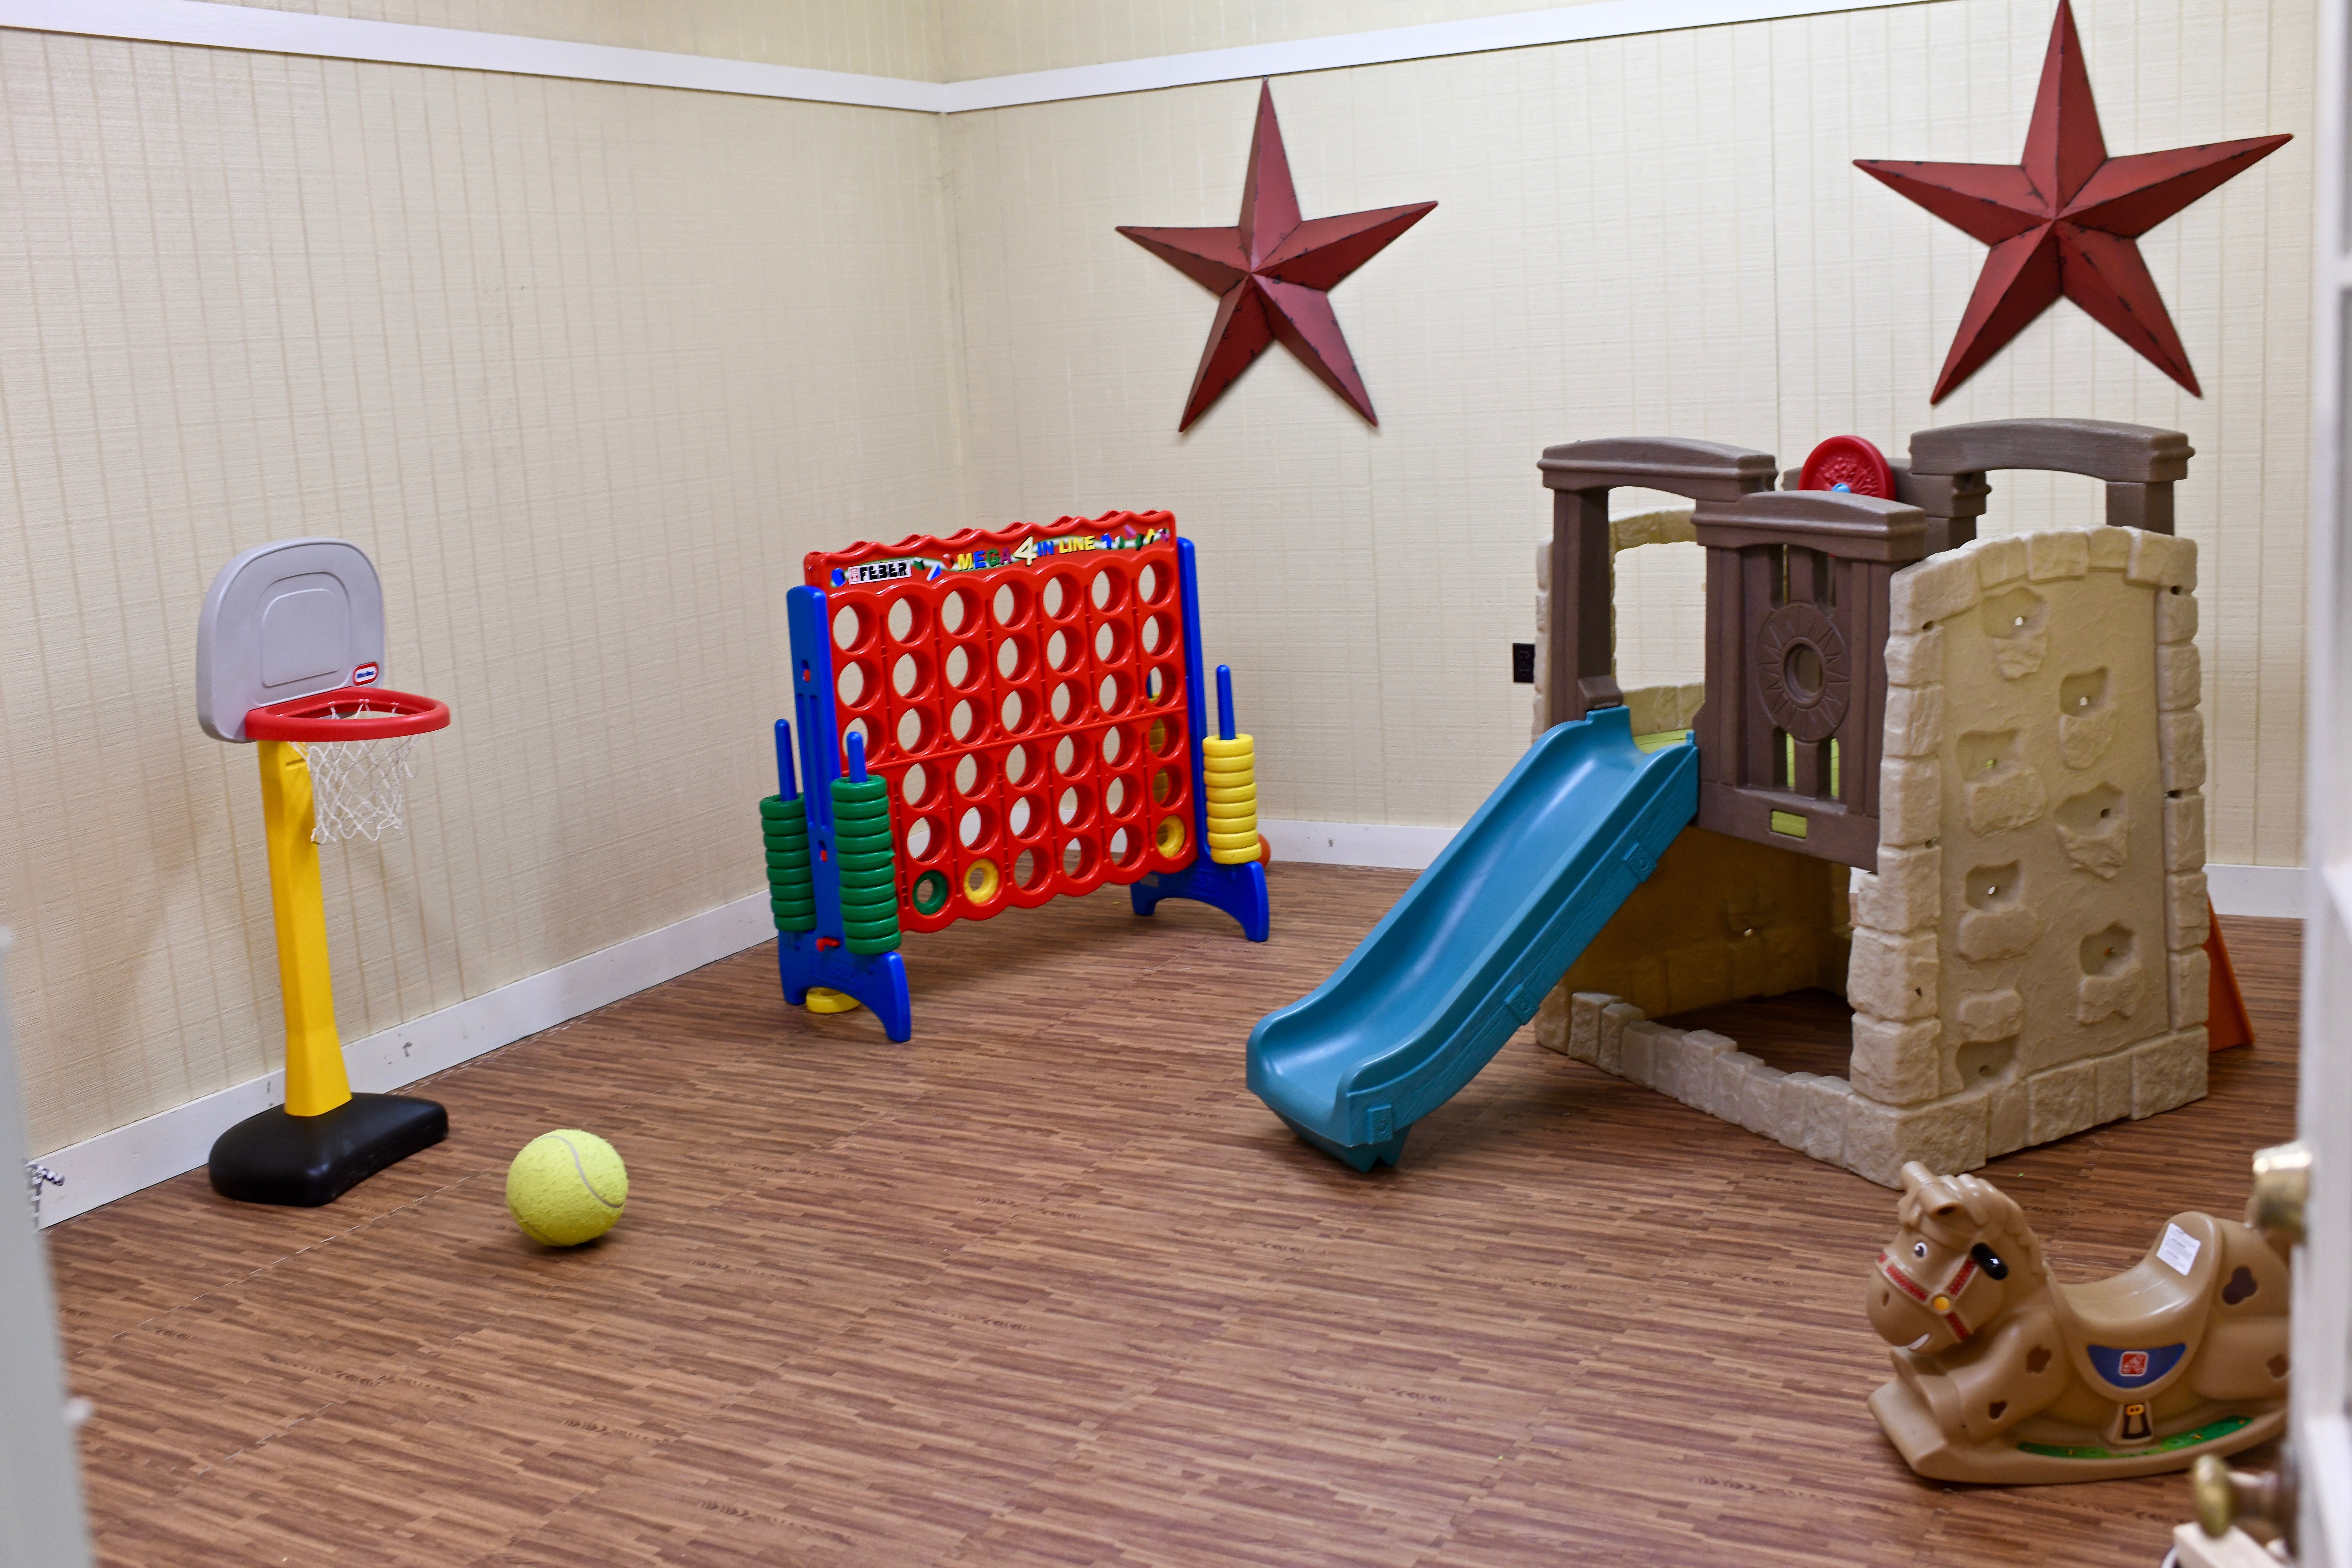 Rec area has a play area for toddlers and infants.  There is an outdoor playground for older kids.